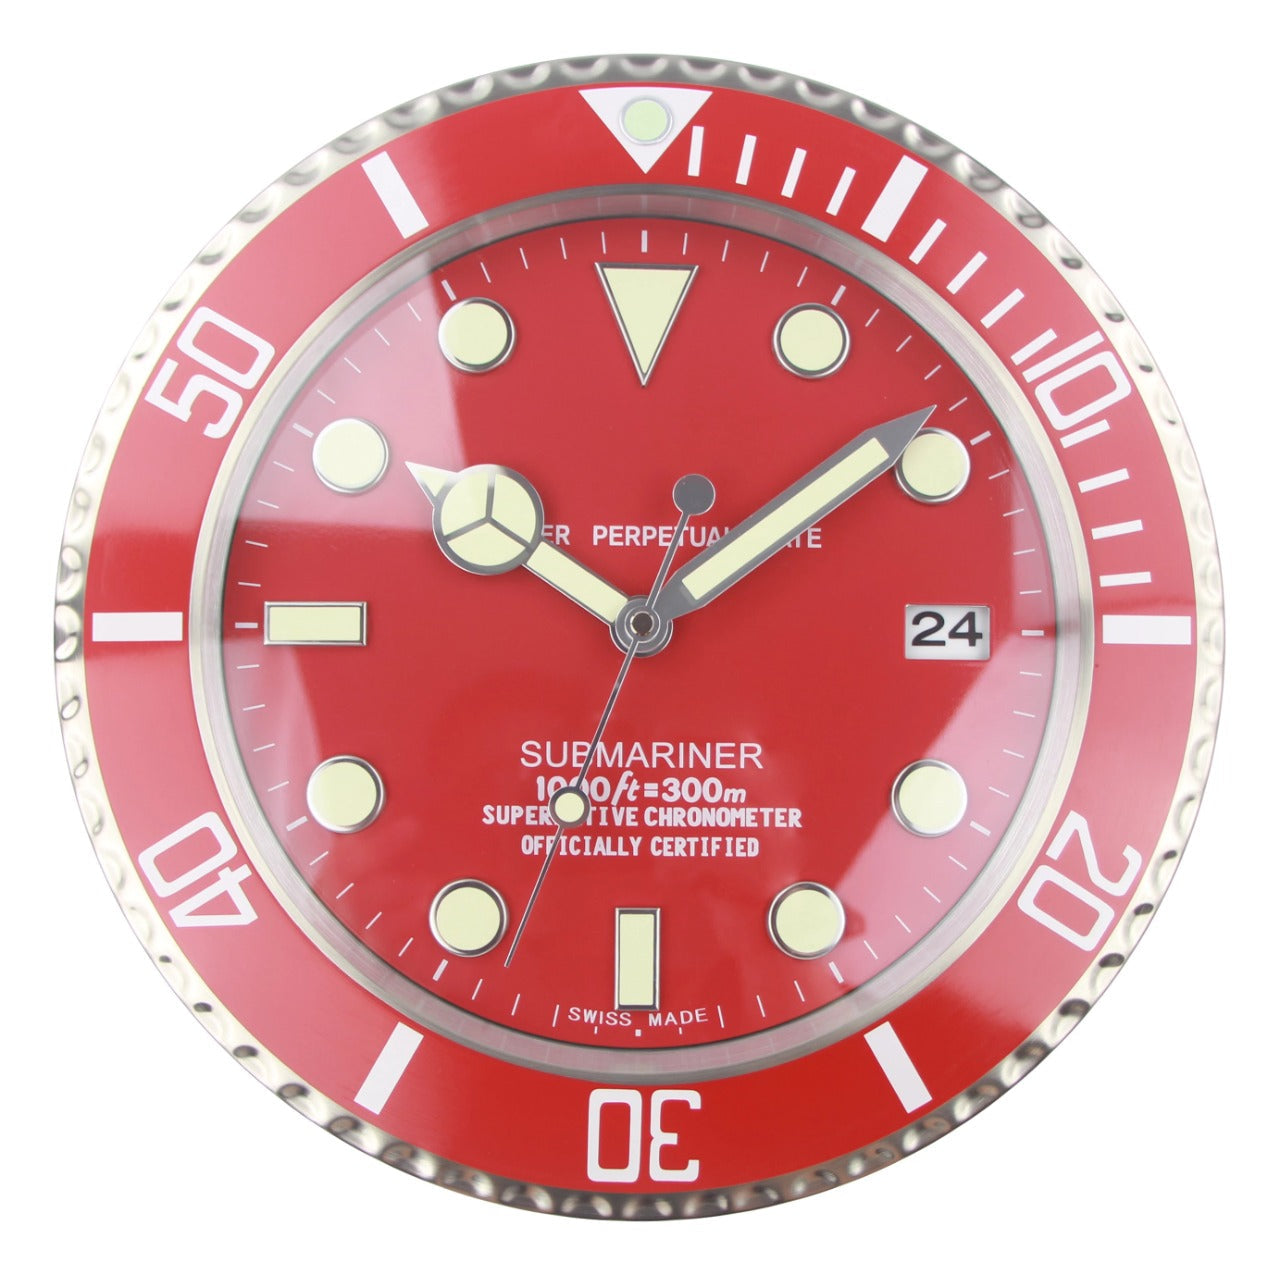 Rolex Wall Clock Quartz Analog Dated Design Metal Art Wall Clock Luminous Function Gold Case & Red Dial Metal Home Decor Wall Clocks Inspired By Submariner II Dated Wall decording Clock- Classy Look Clock For Home D cor Wall RLX-WC-802